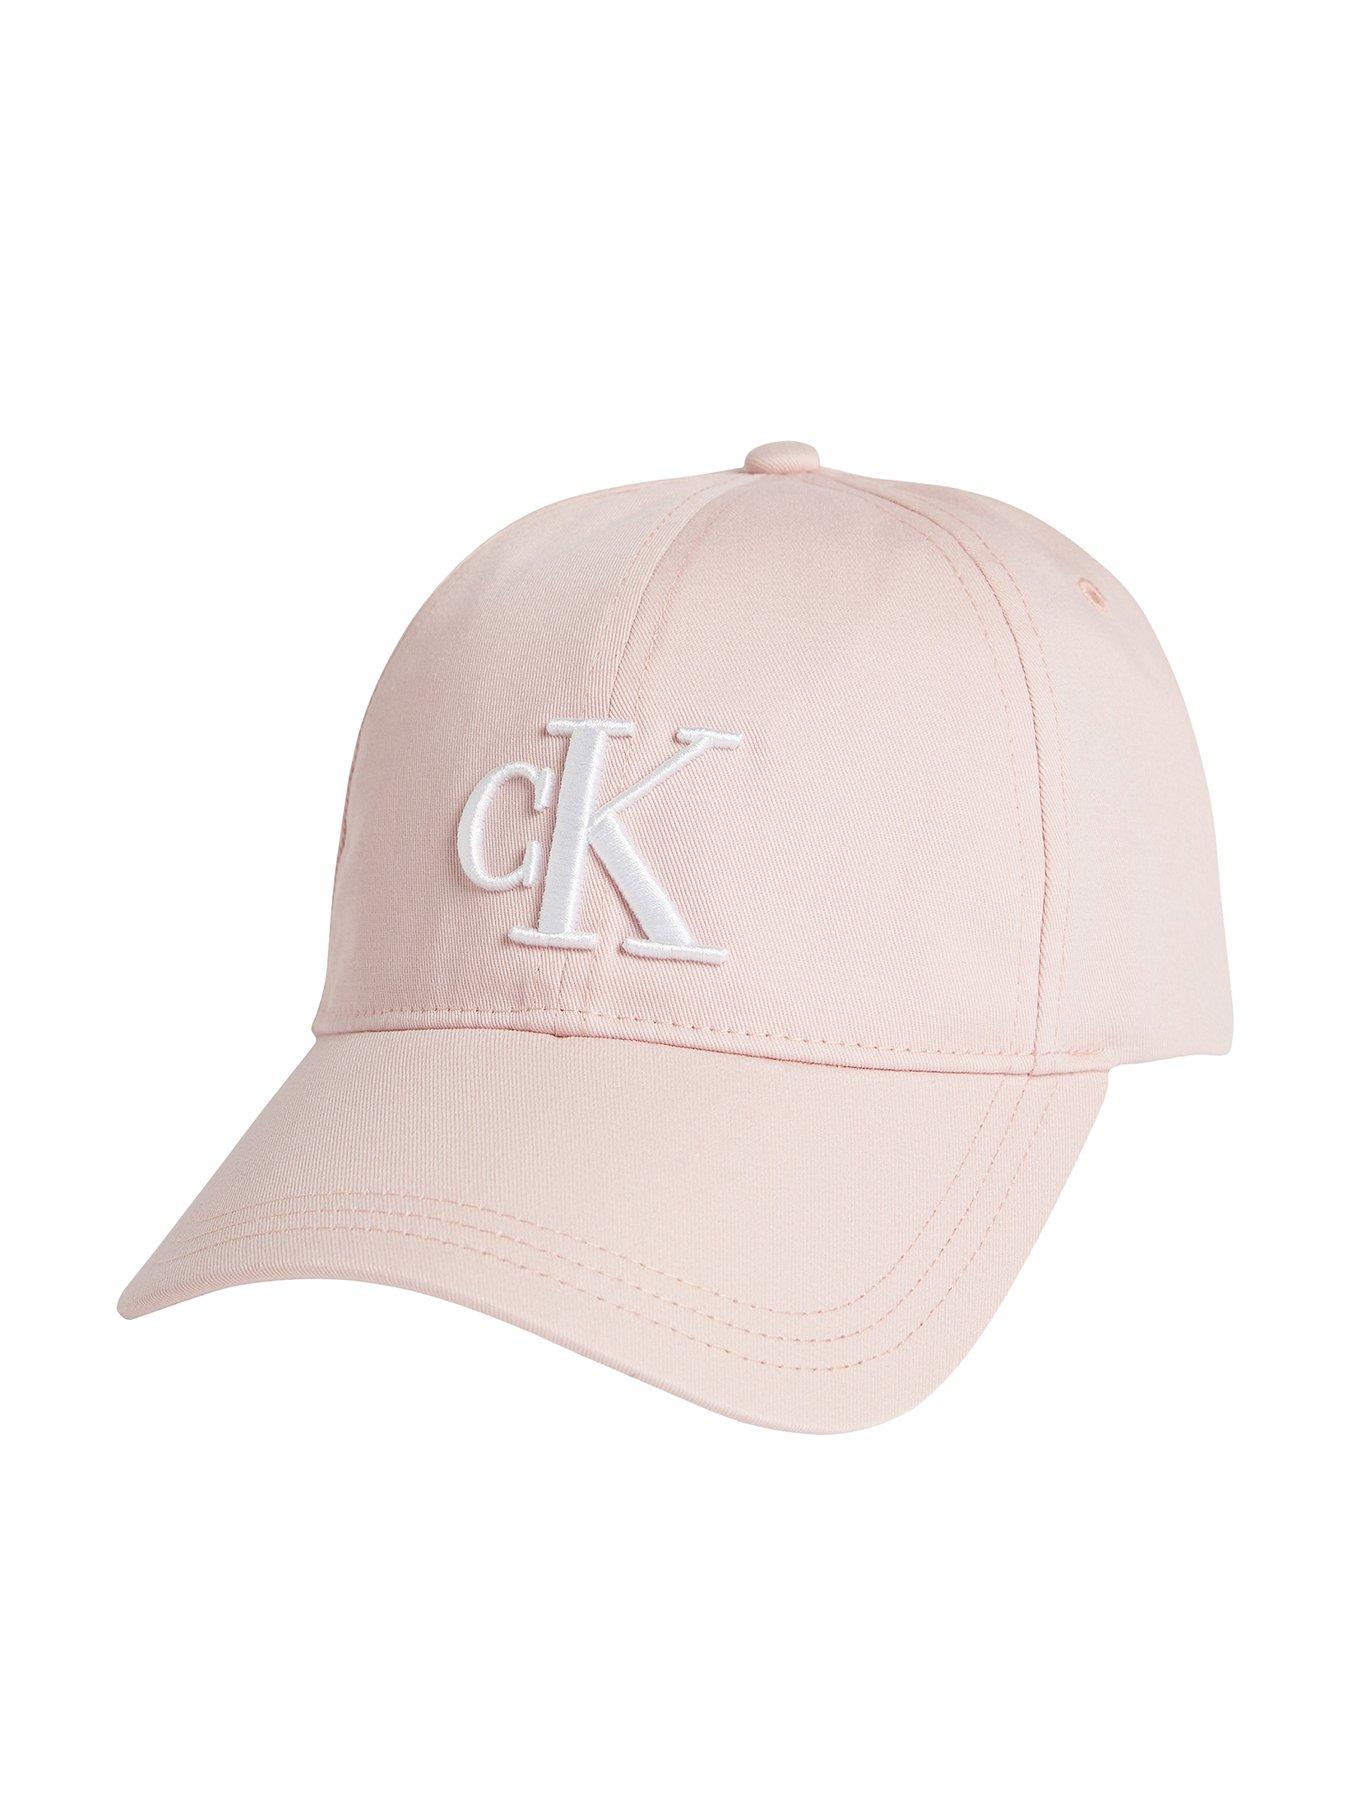 Pink Single discount 74% WOMEN FASHION Accessories Hat and cap Pink NoName hat and cap 